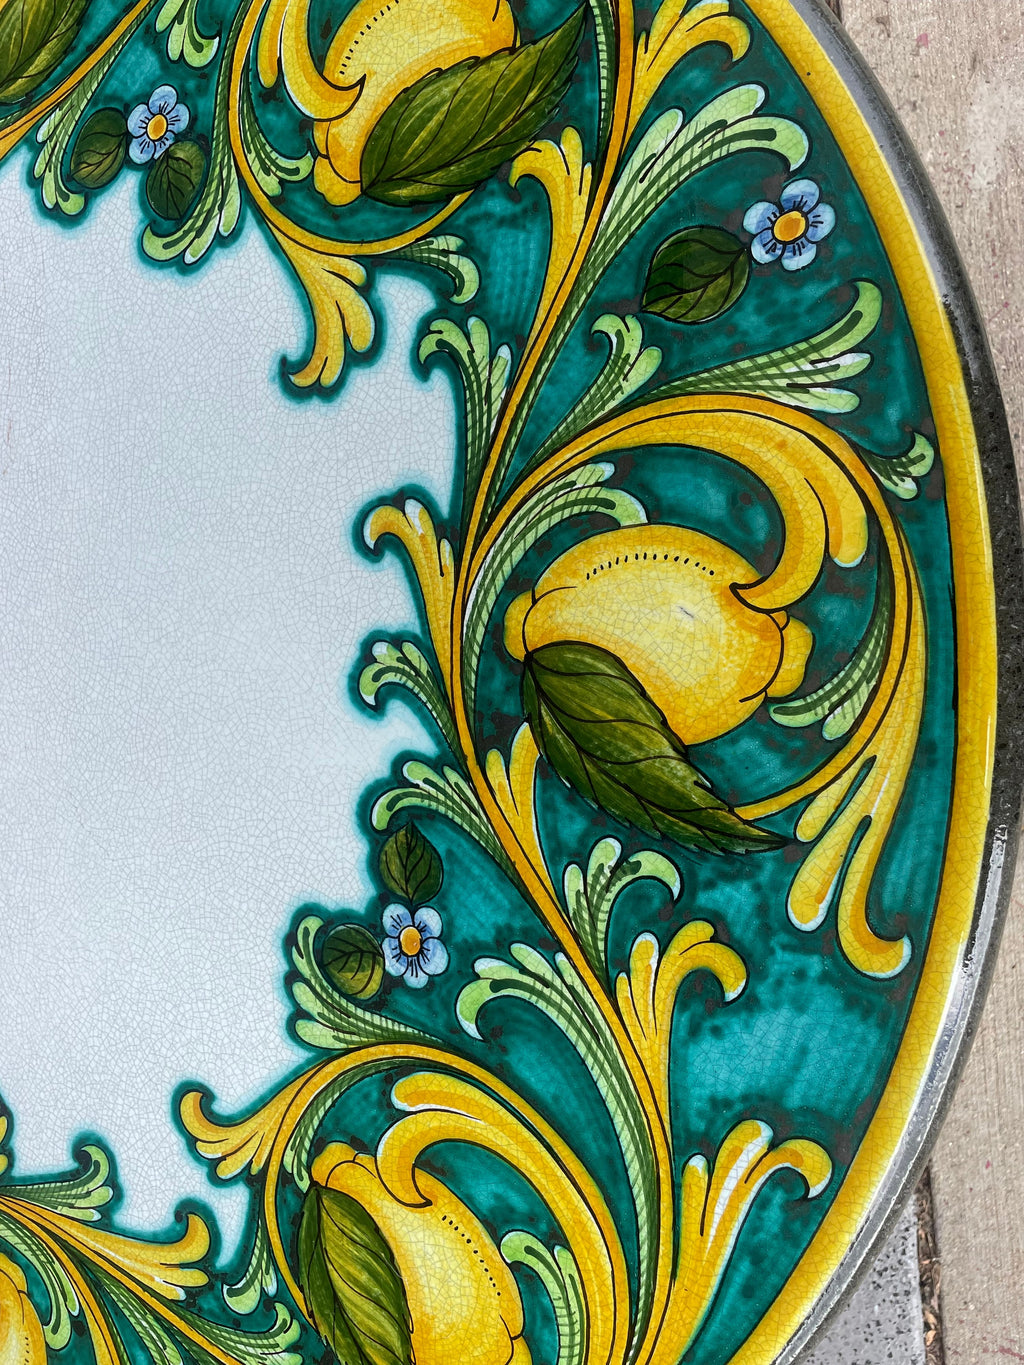 Round table hand painted on lava stone